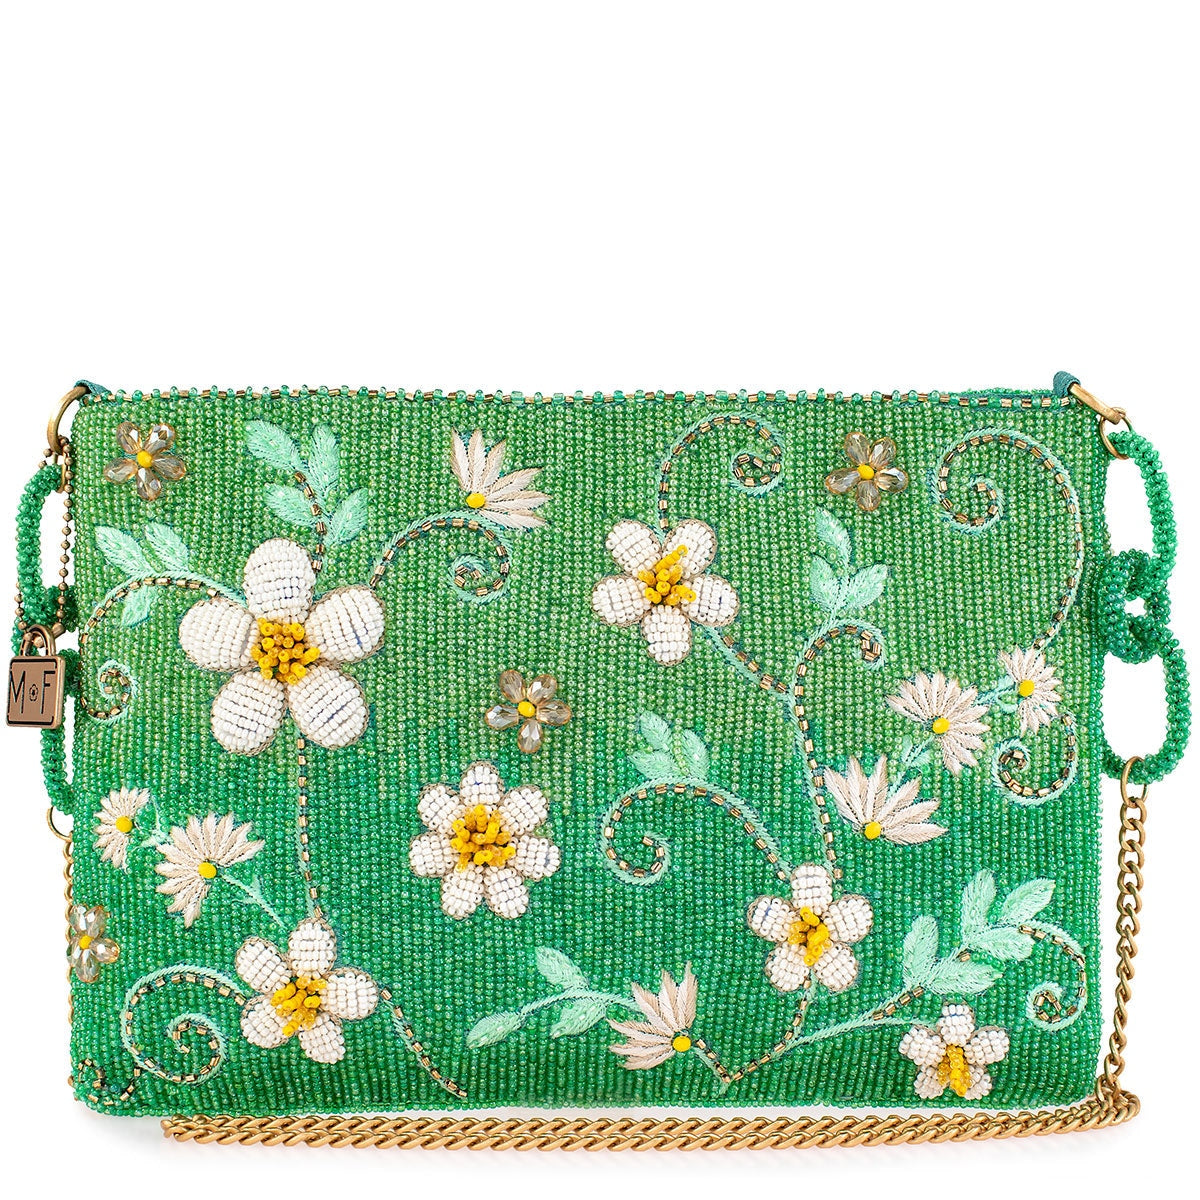 NOT AVAILABLE Kate Spade Large Green Floral Tote | Kate spade bag blue, Kate  spade tote bag, Yellow leather bag